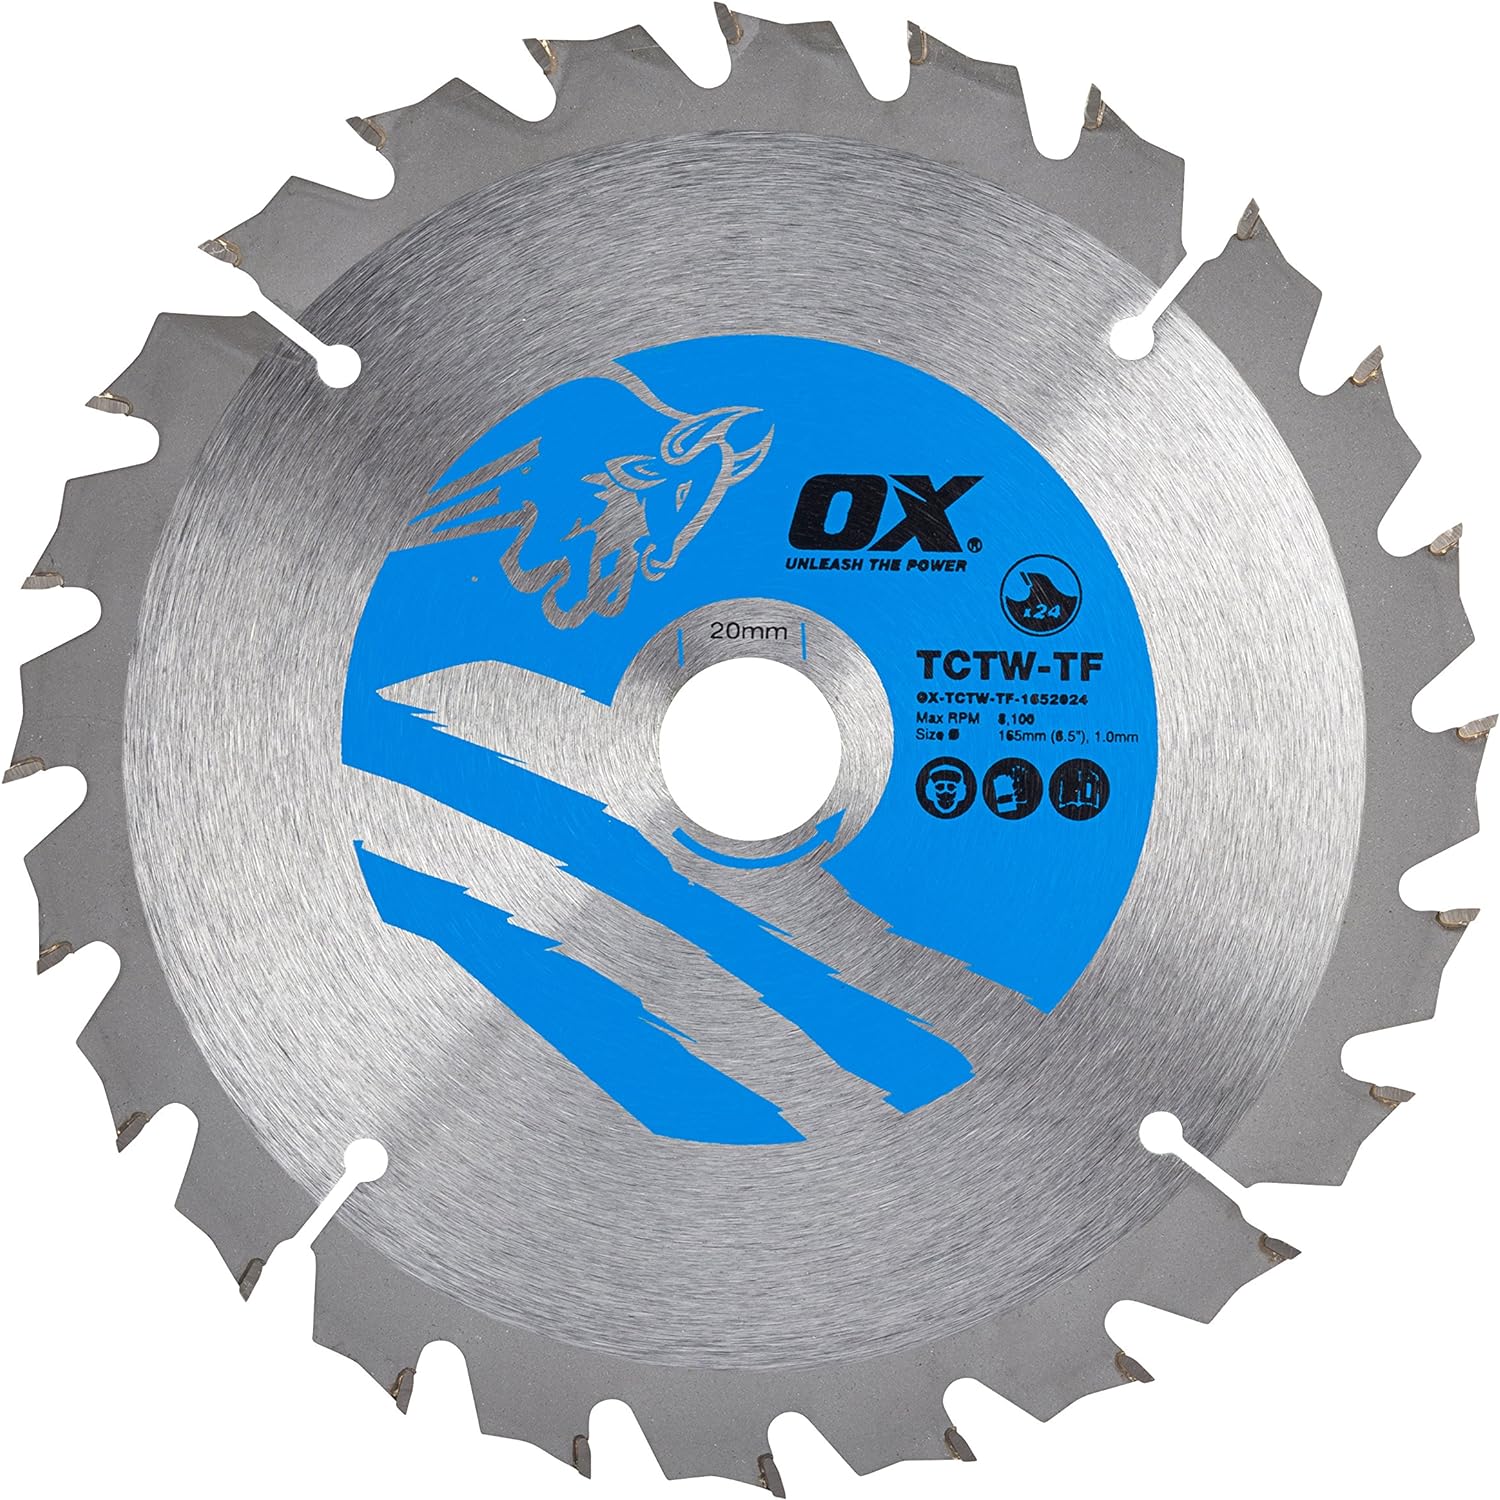 Are You Wasting Money on Low-Quality Meat Band Saw Blades: Discover 15 Ways to Save Big on High-Performance Hobart Blades